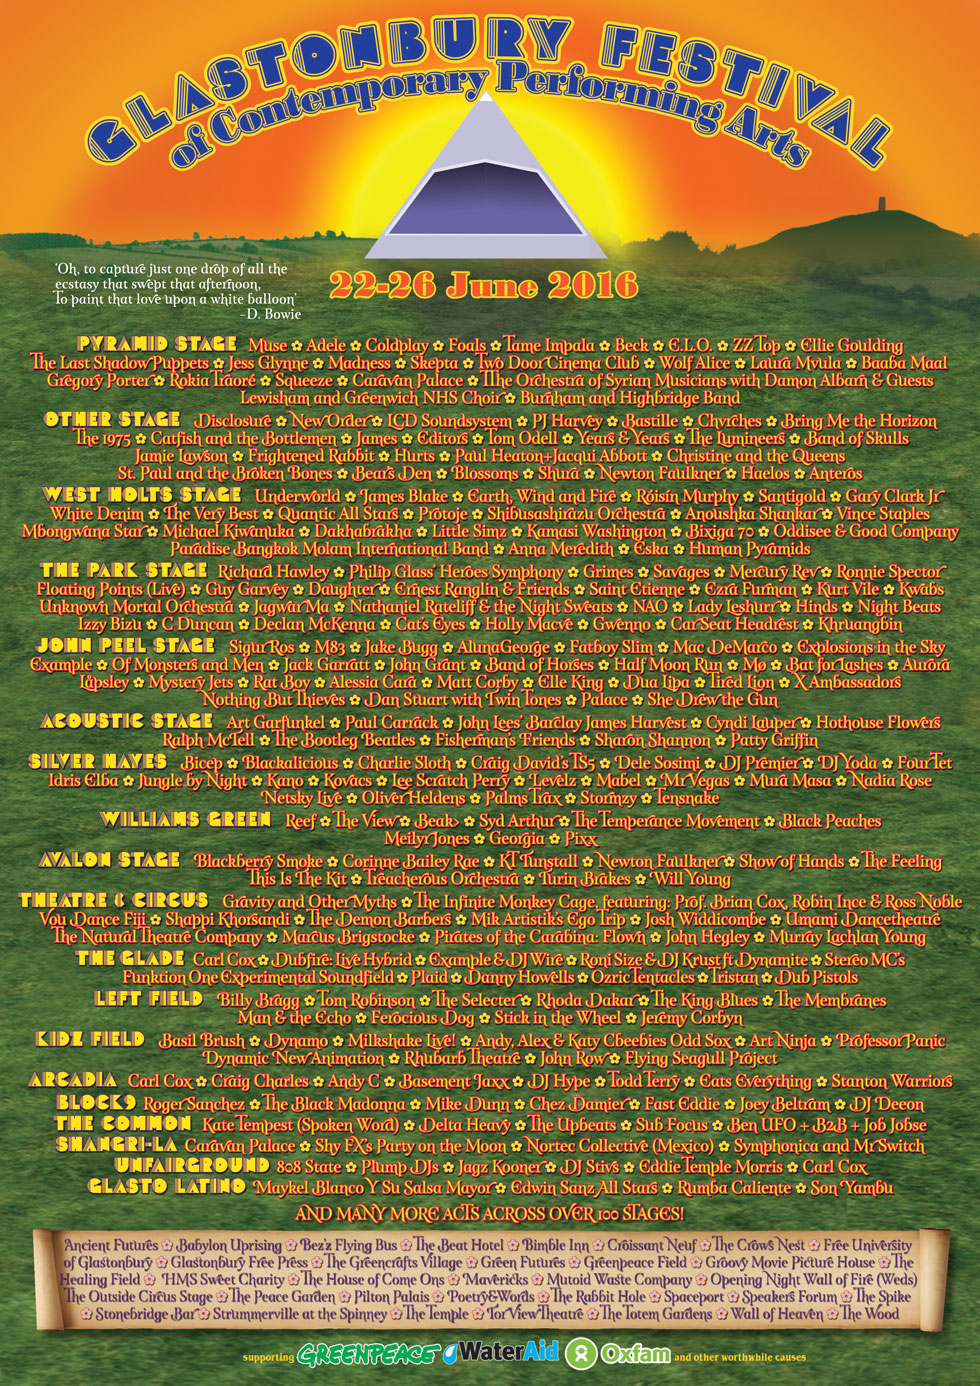 Glastonbury line-up includes acts Psycho-Acoustic Goat and DJ Absolutely  S***